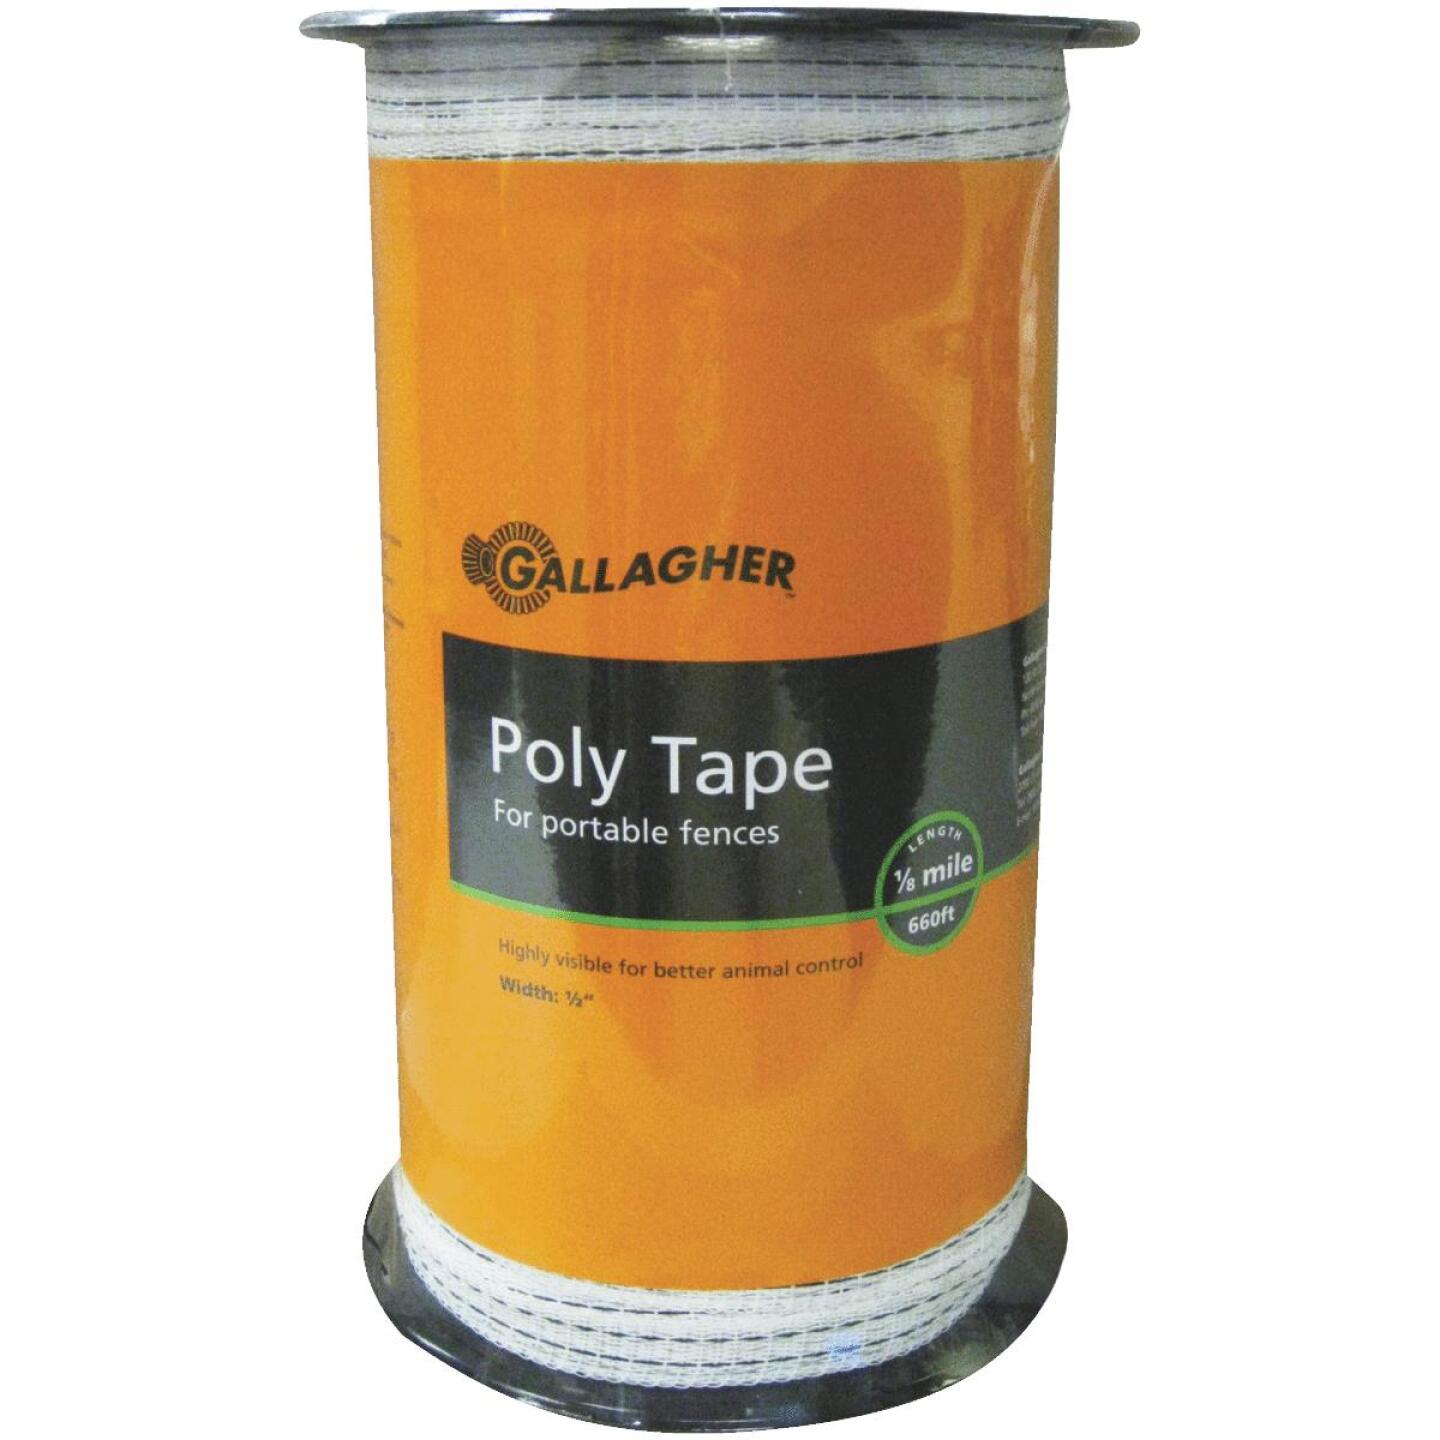 Gallagher, Gallagher 1/2 In. x 656 Ft. Polyethylene Electric Fence Poly Tape